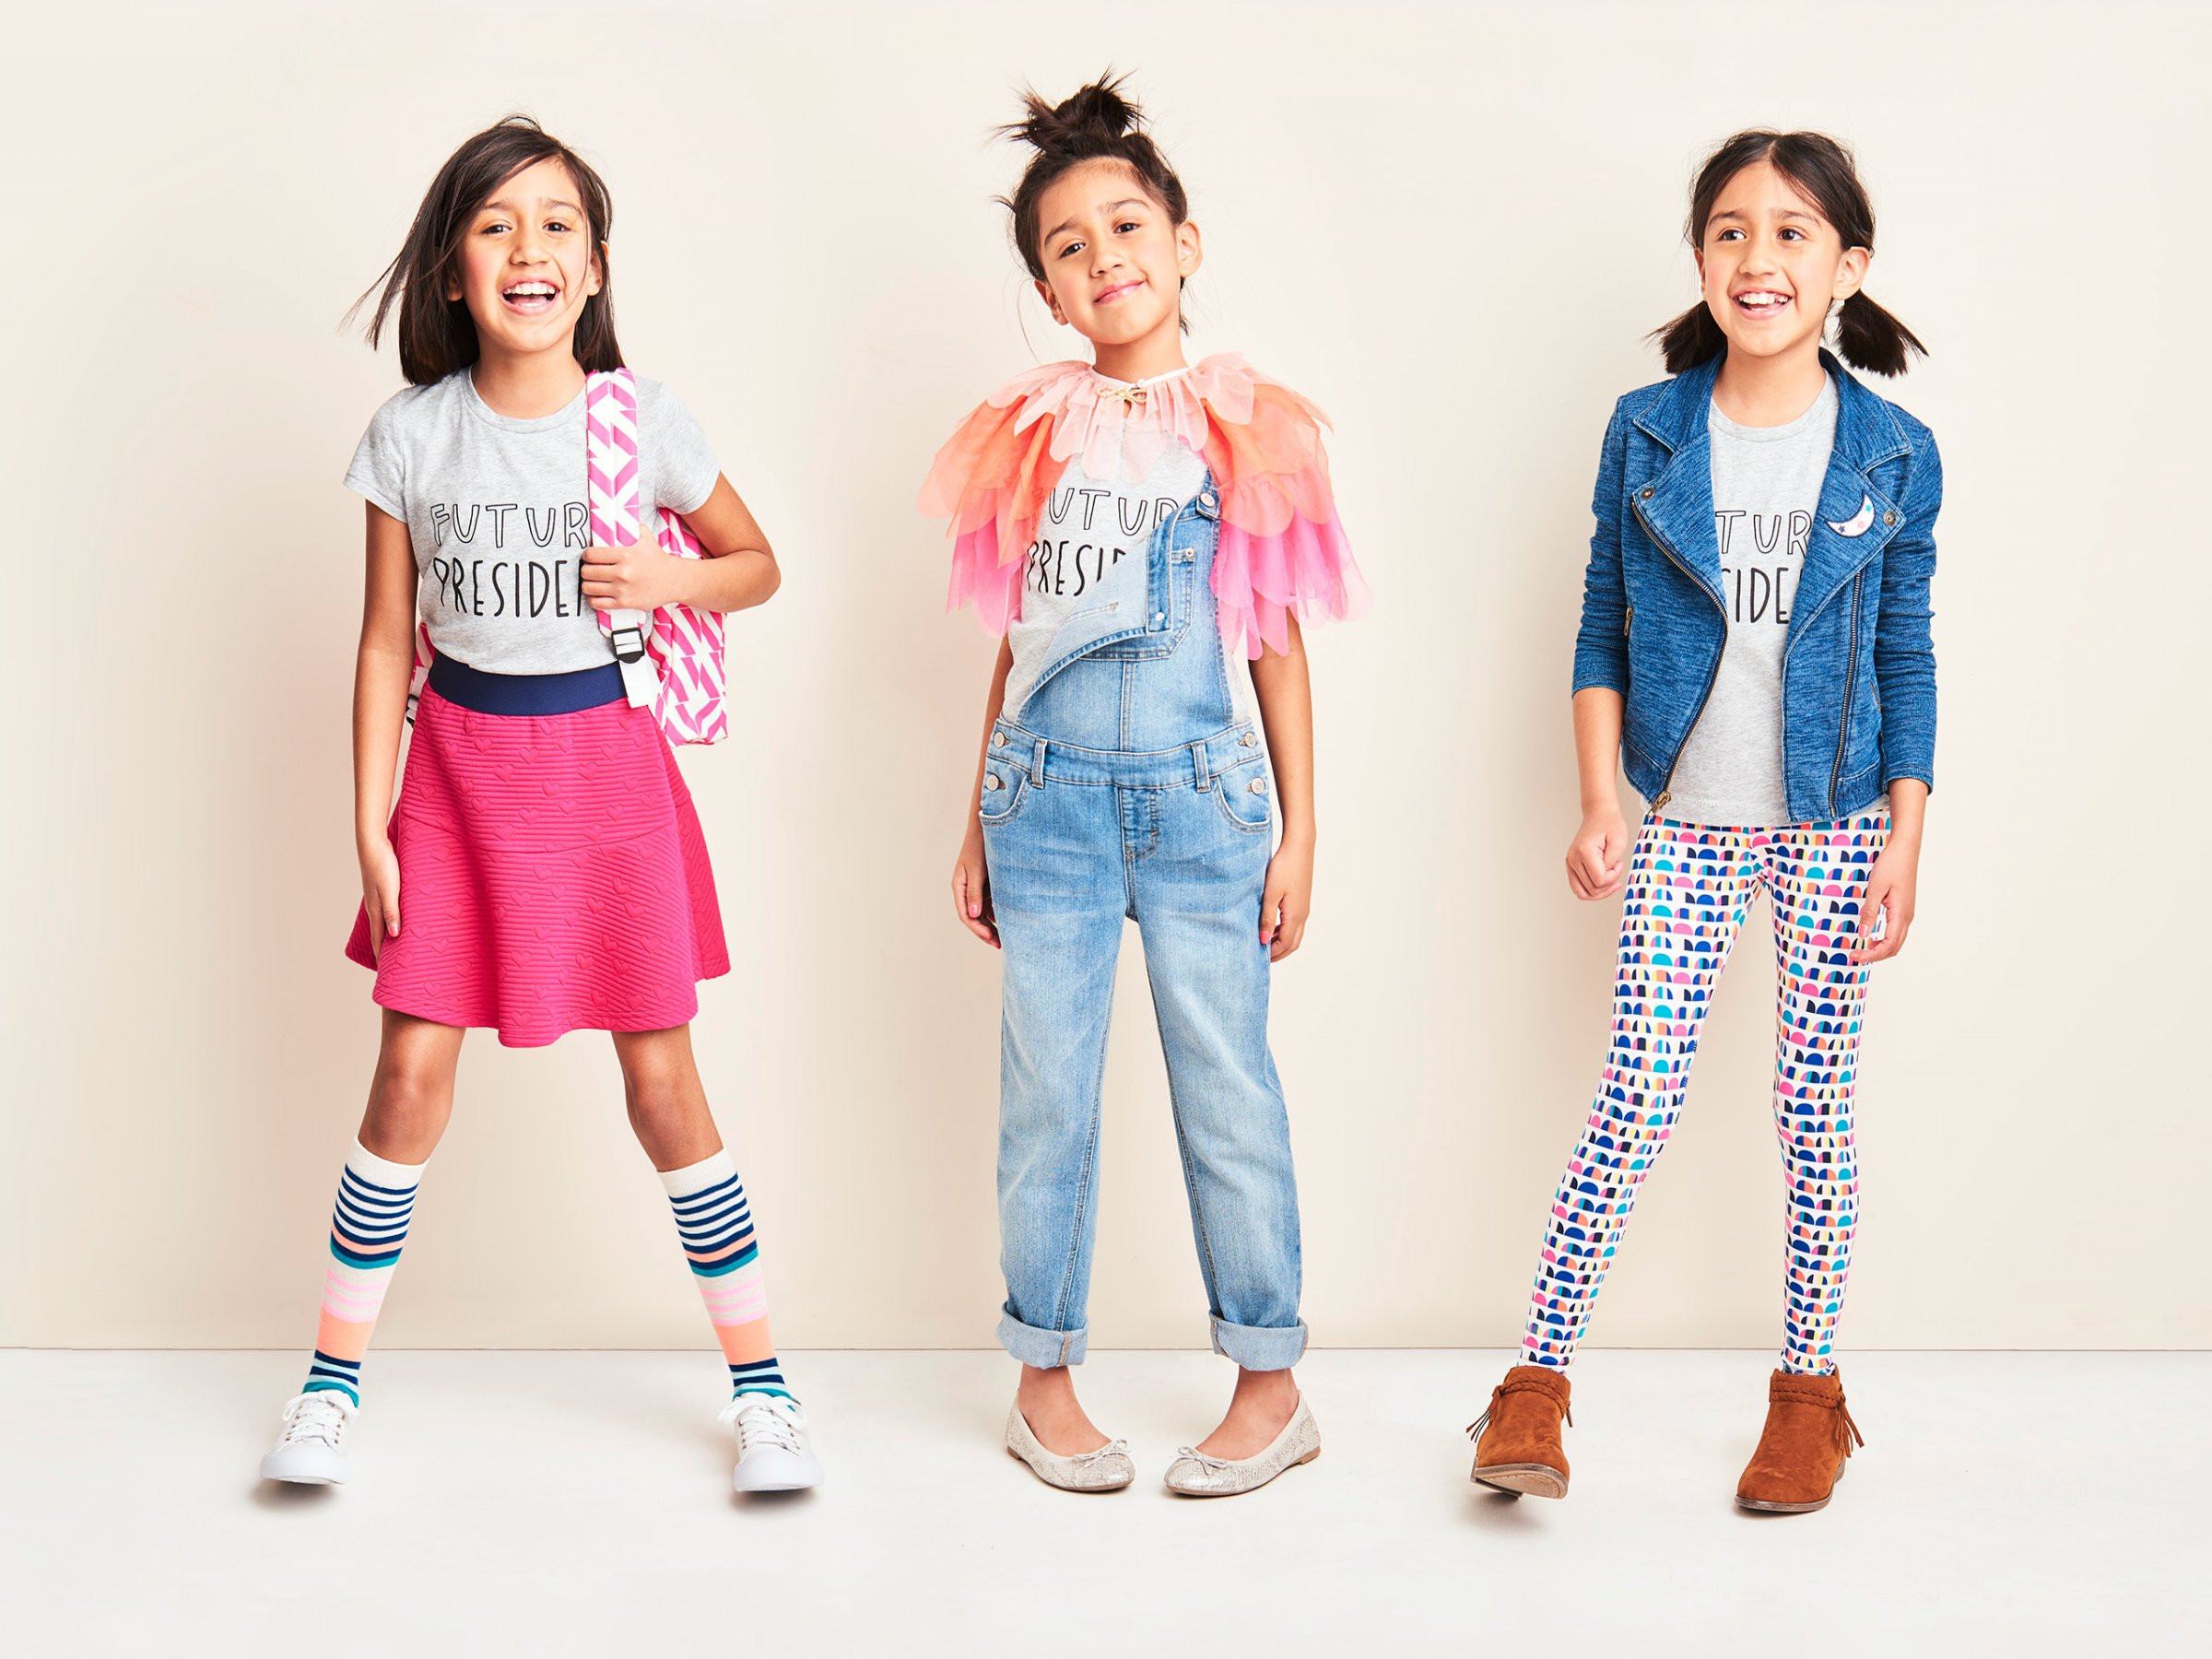 Fashion Clothes For Kids
 Today in awesome Tar debuts new kids clothing line